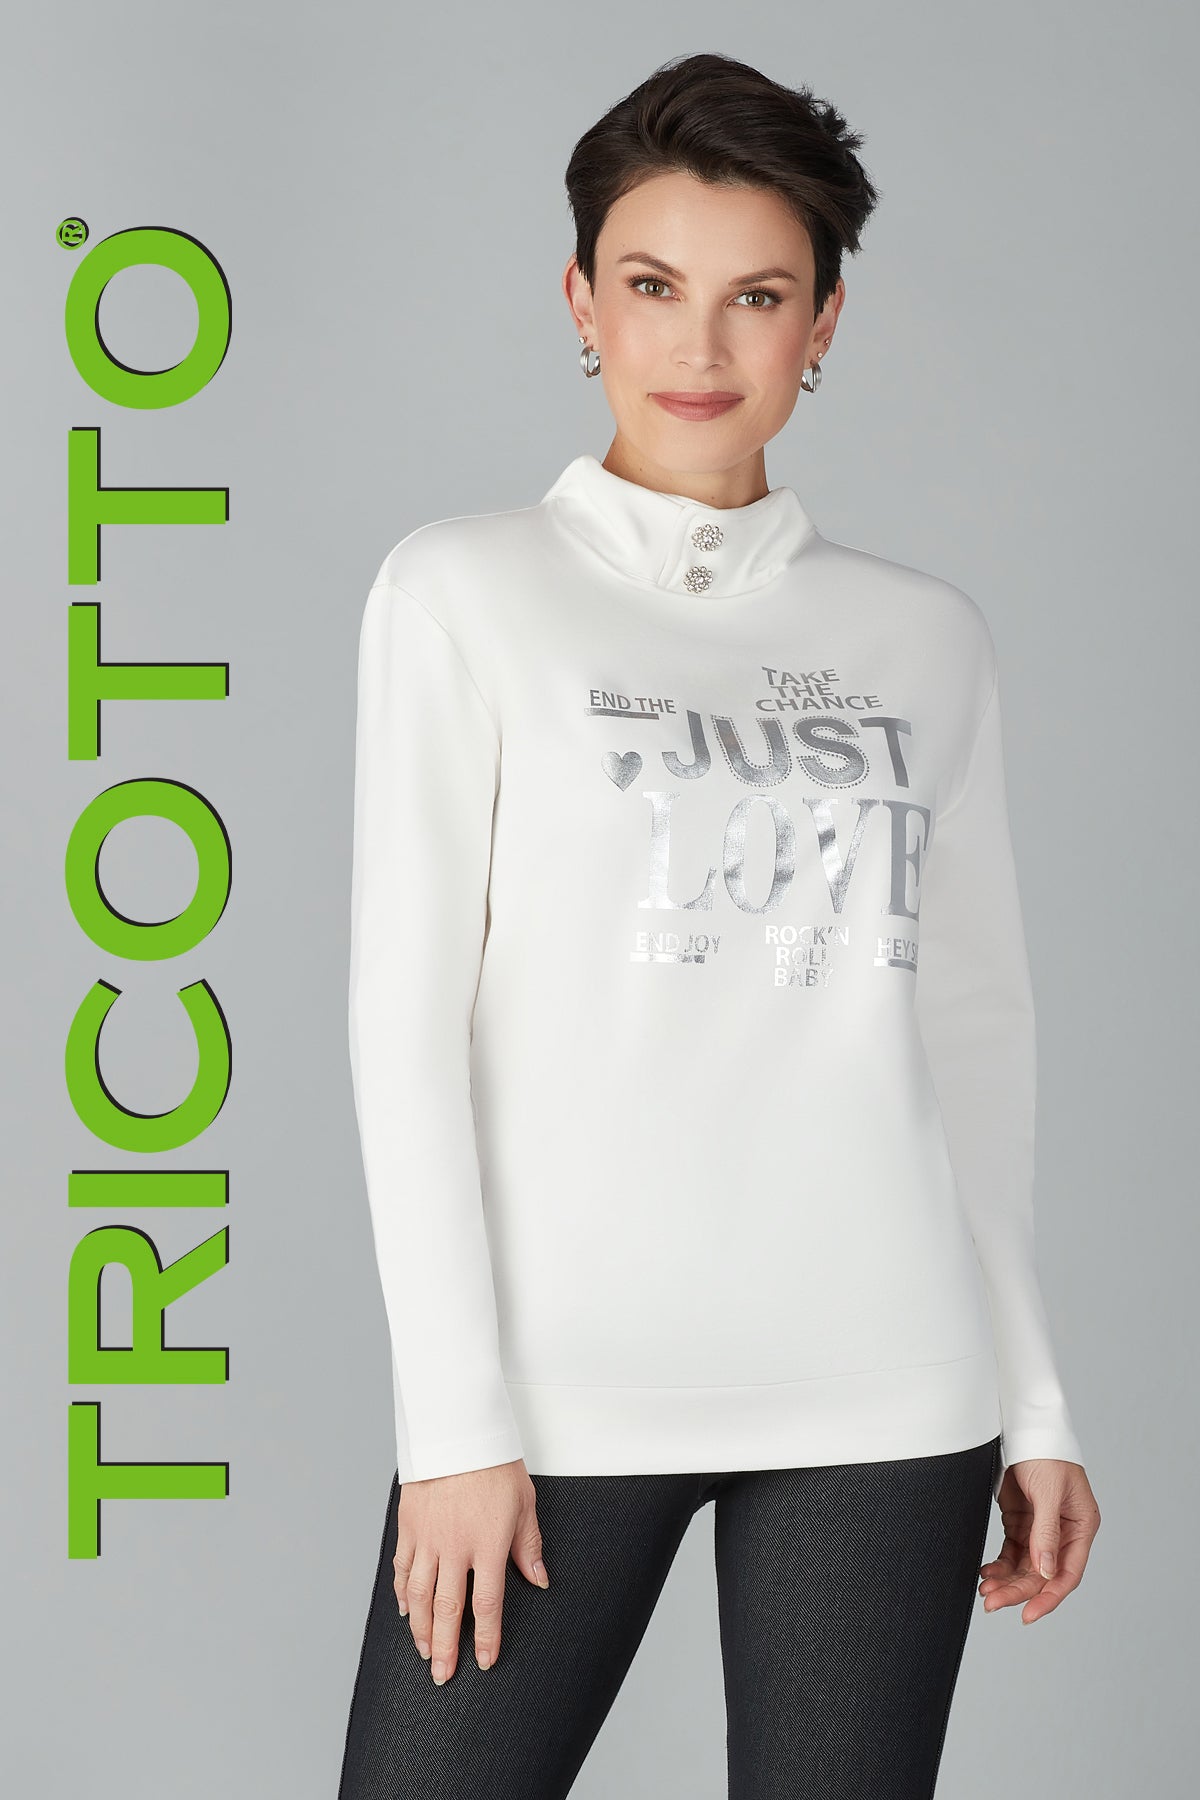 Tricotto Online Sweater Shop-Buy Tricotto Sweaters Online-Tricotto Clothing Montreal-Fashion Sweaters Online Canada